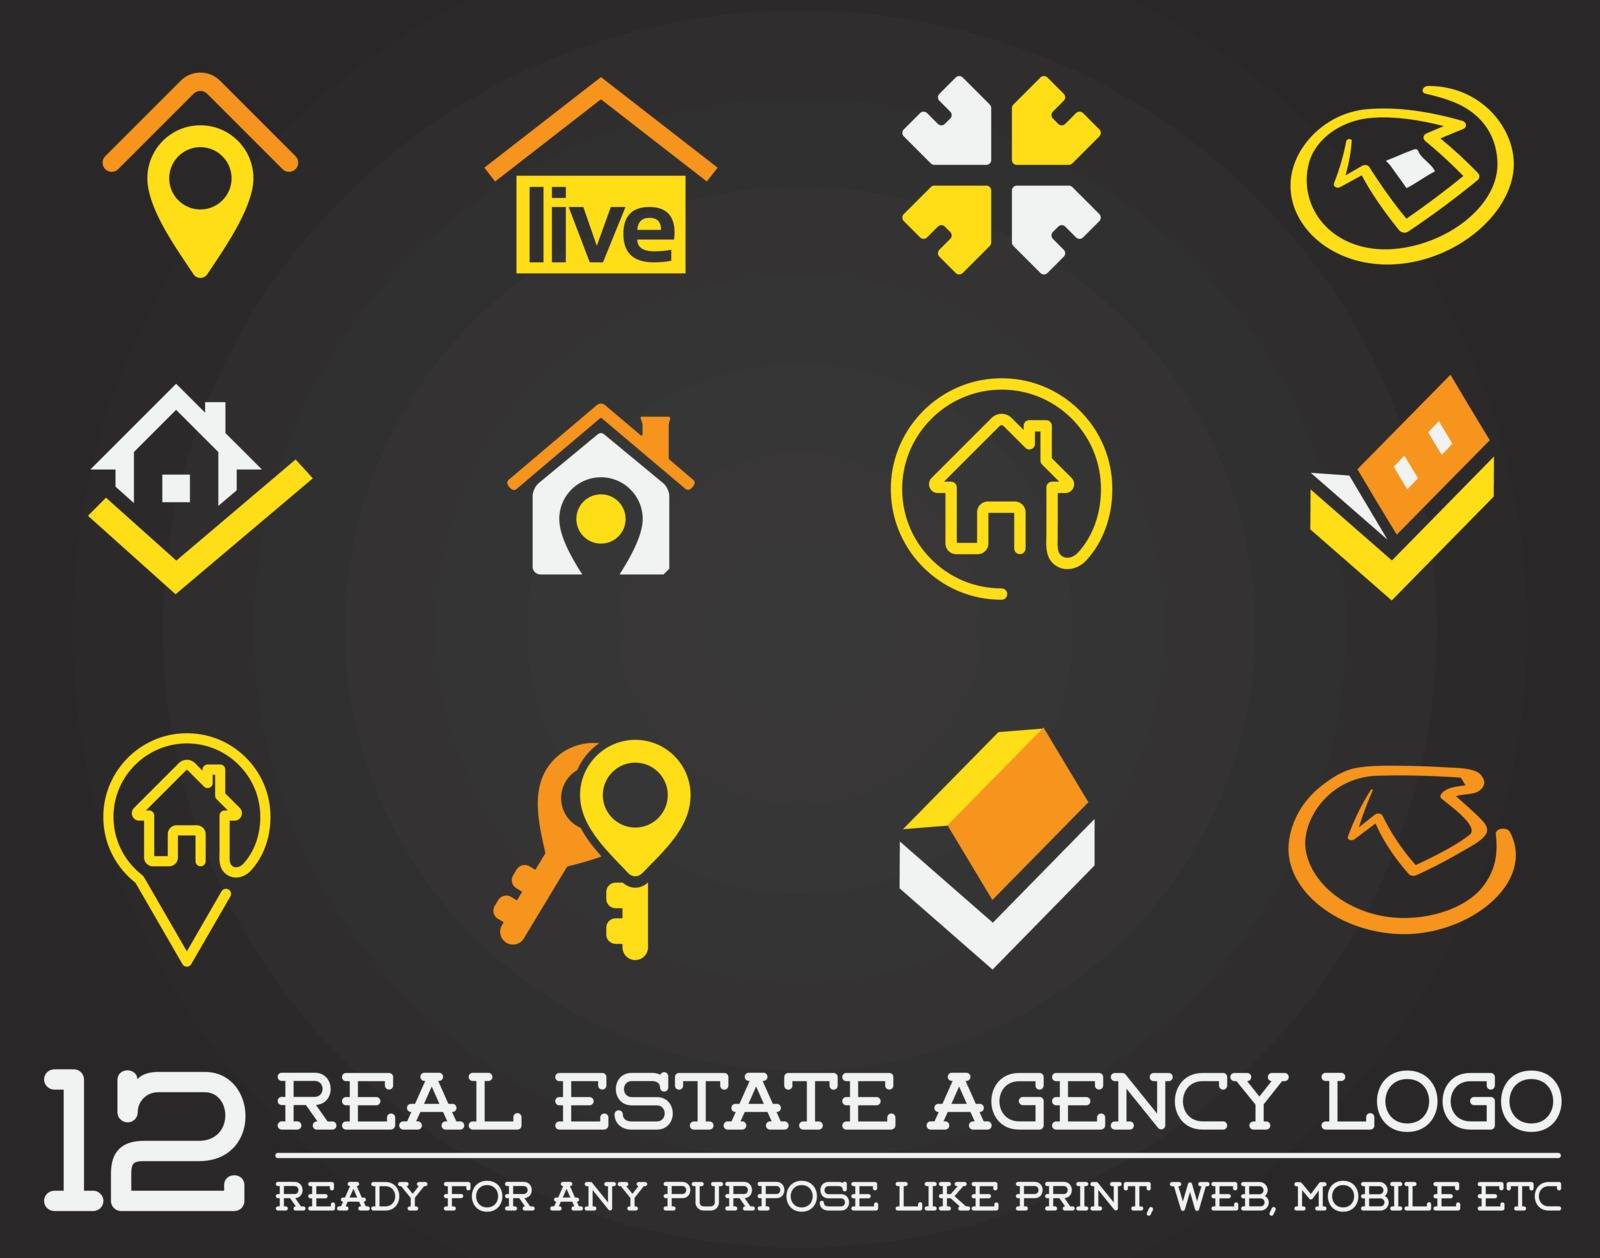 Set of Template logo for real estate agency or cottage town elite class. Real estate logo.